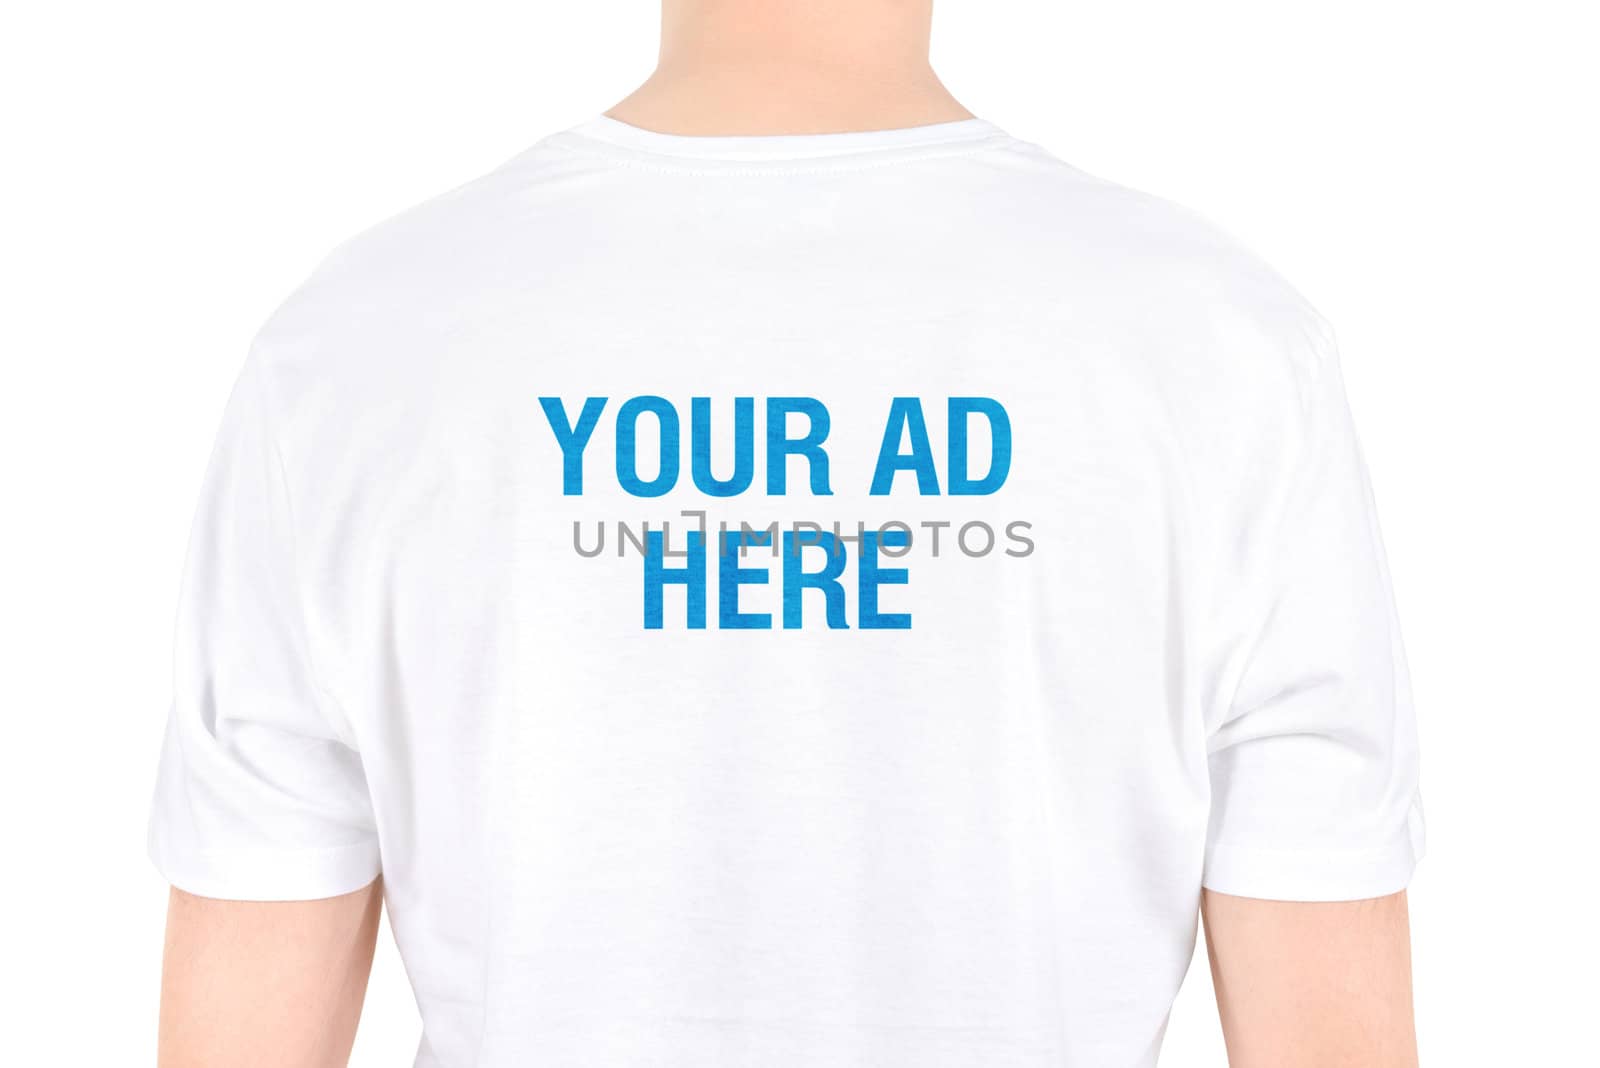 Your AD on a white t-shirt concept. Isolated on white.